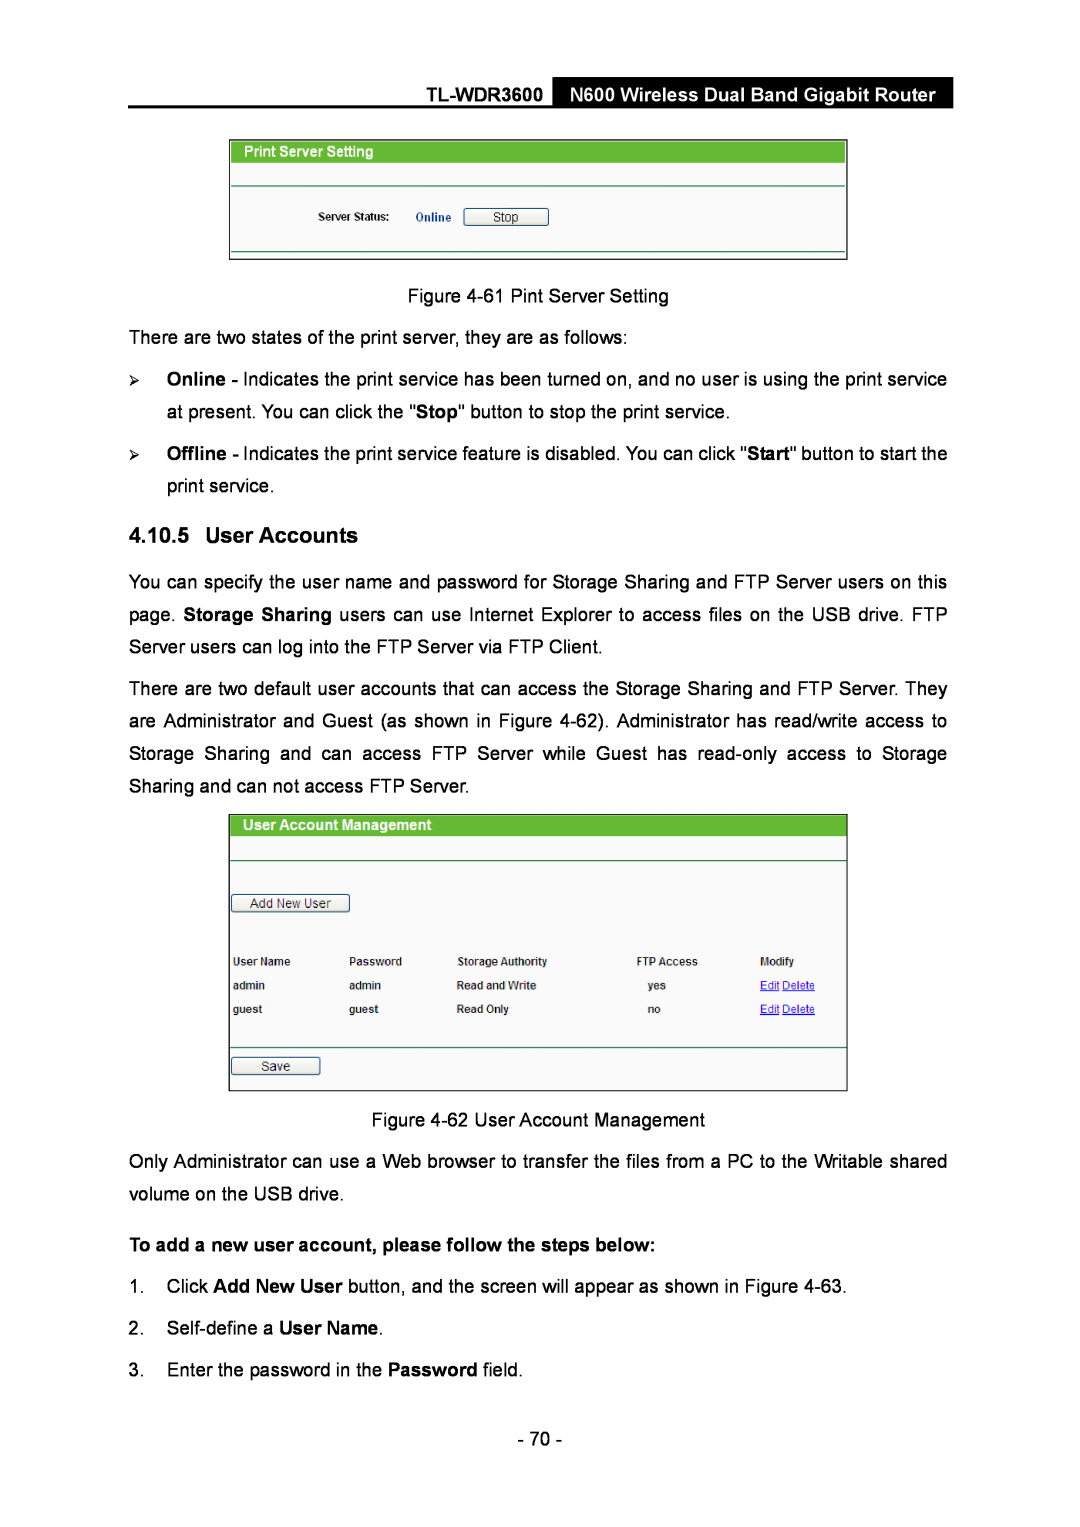 TP-Link TL-WDR3600 manual User Accounts, To add a new user account, please follow the steps below 